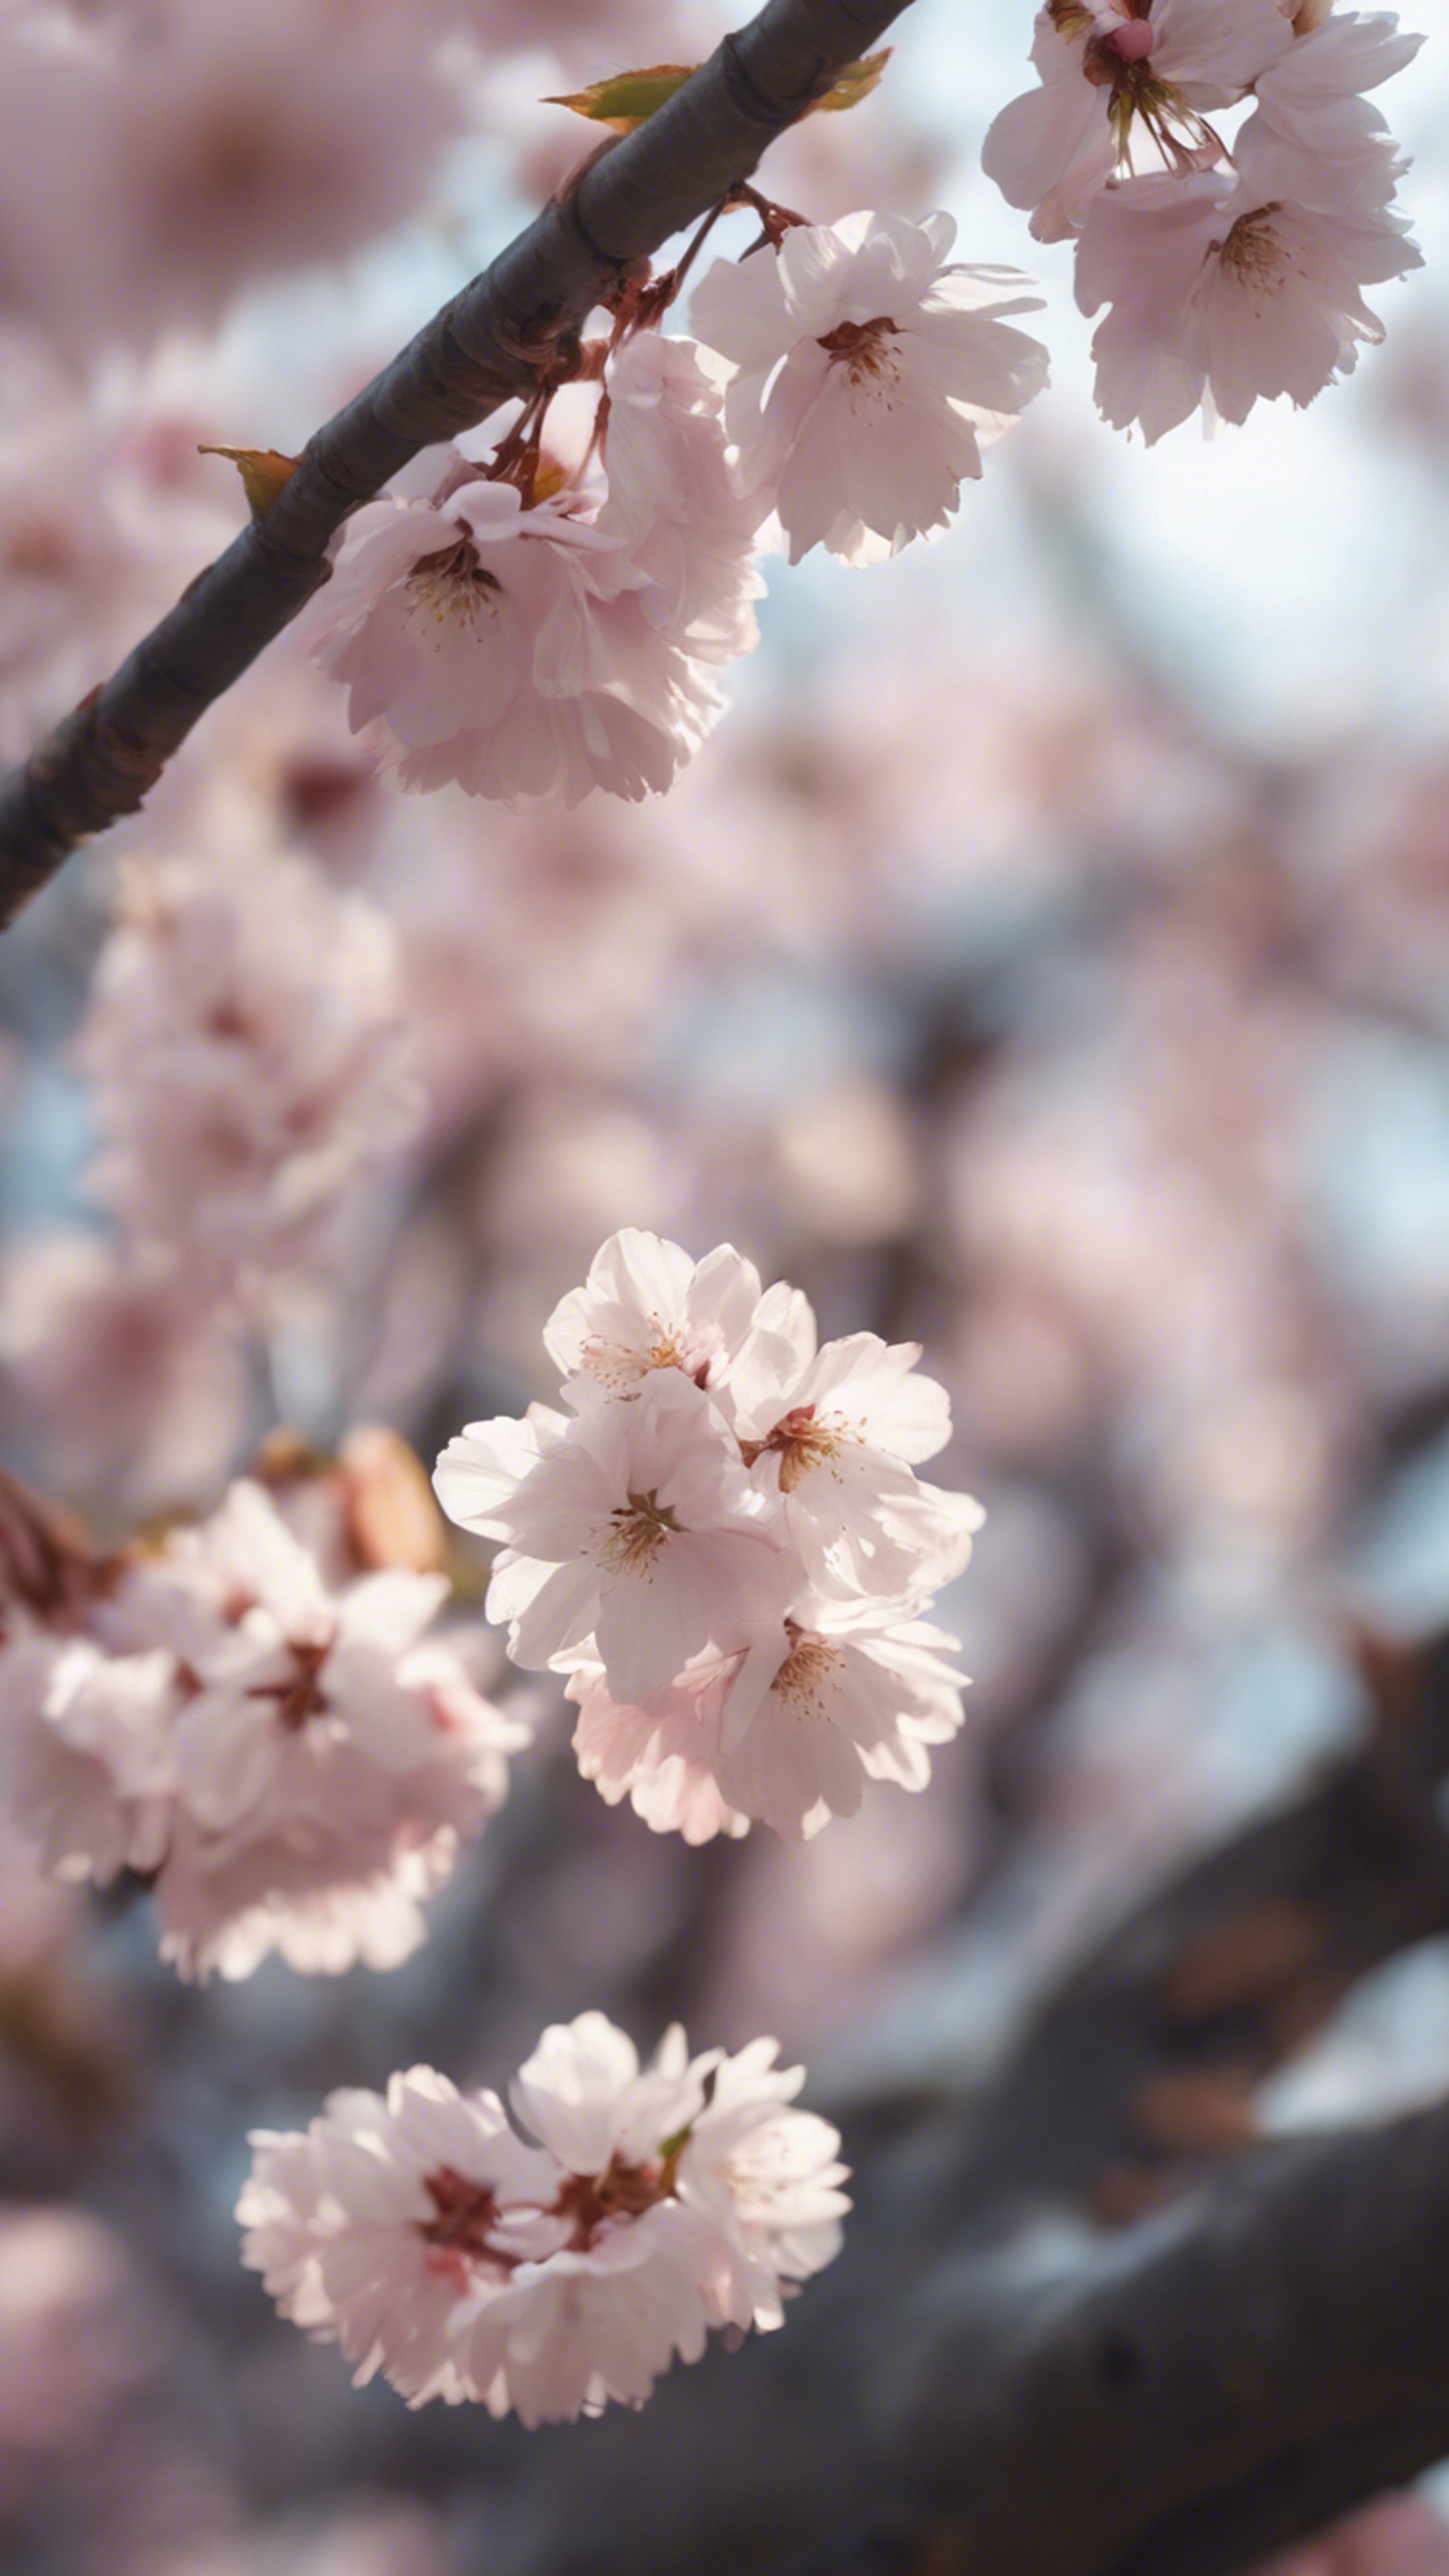 A close-up view of cherry blossom petals falling gently from the tree. Fond d'écran[73cf20157d554b6991b4]